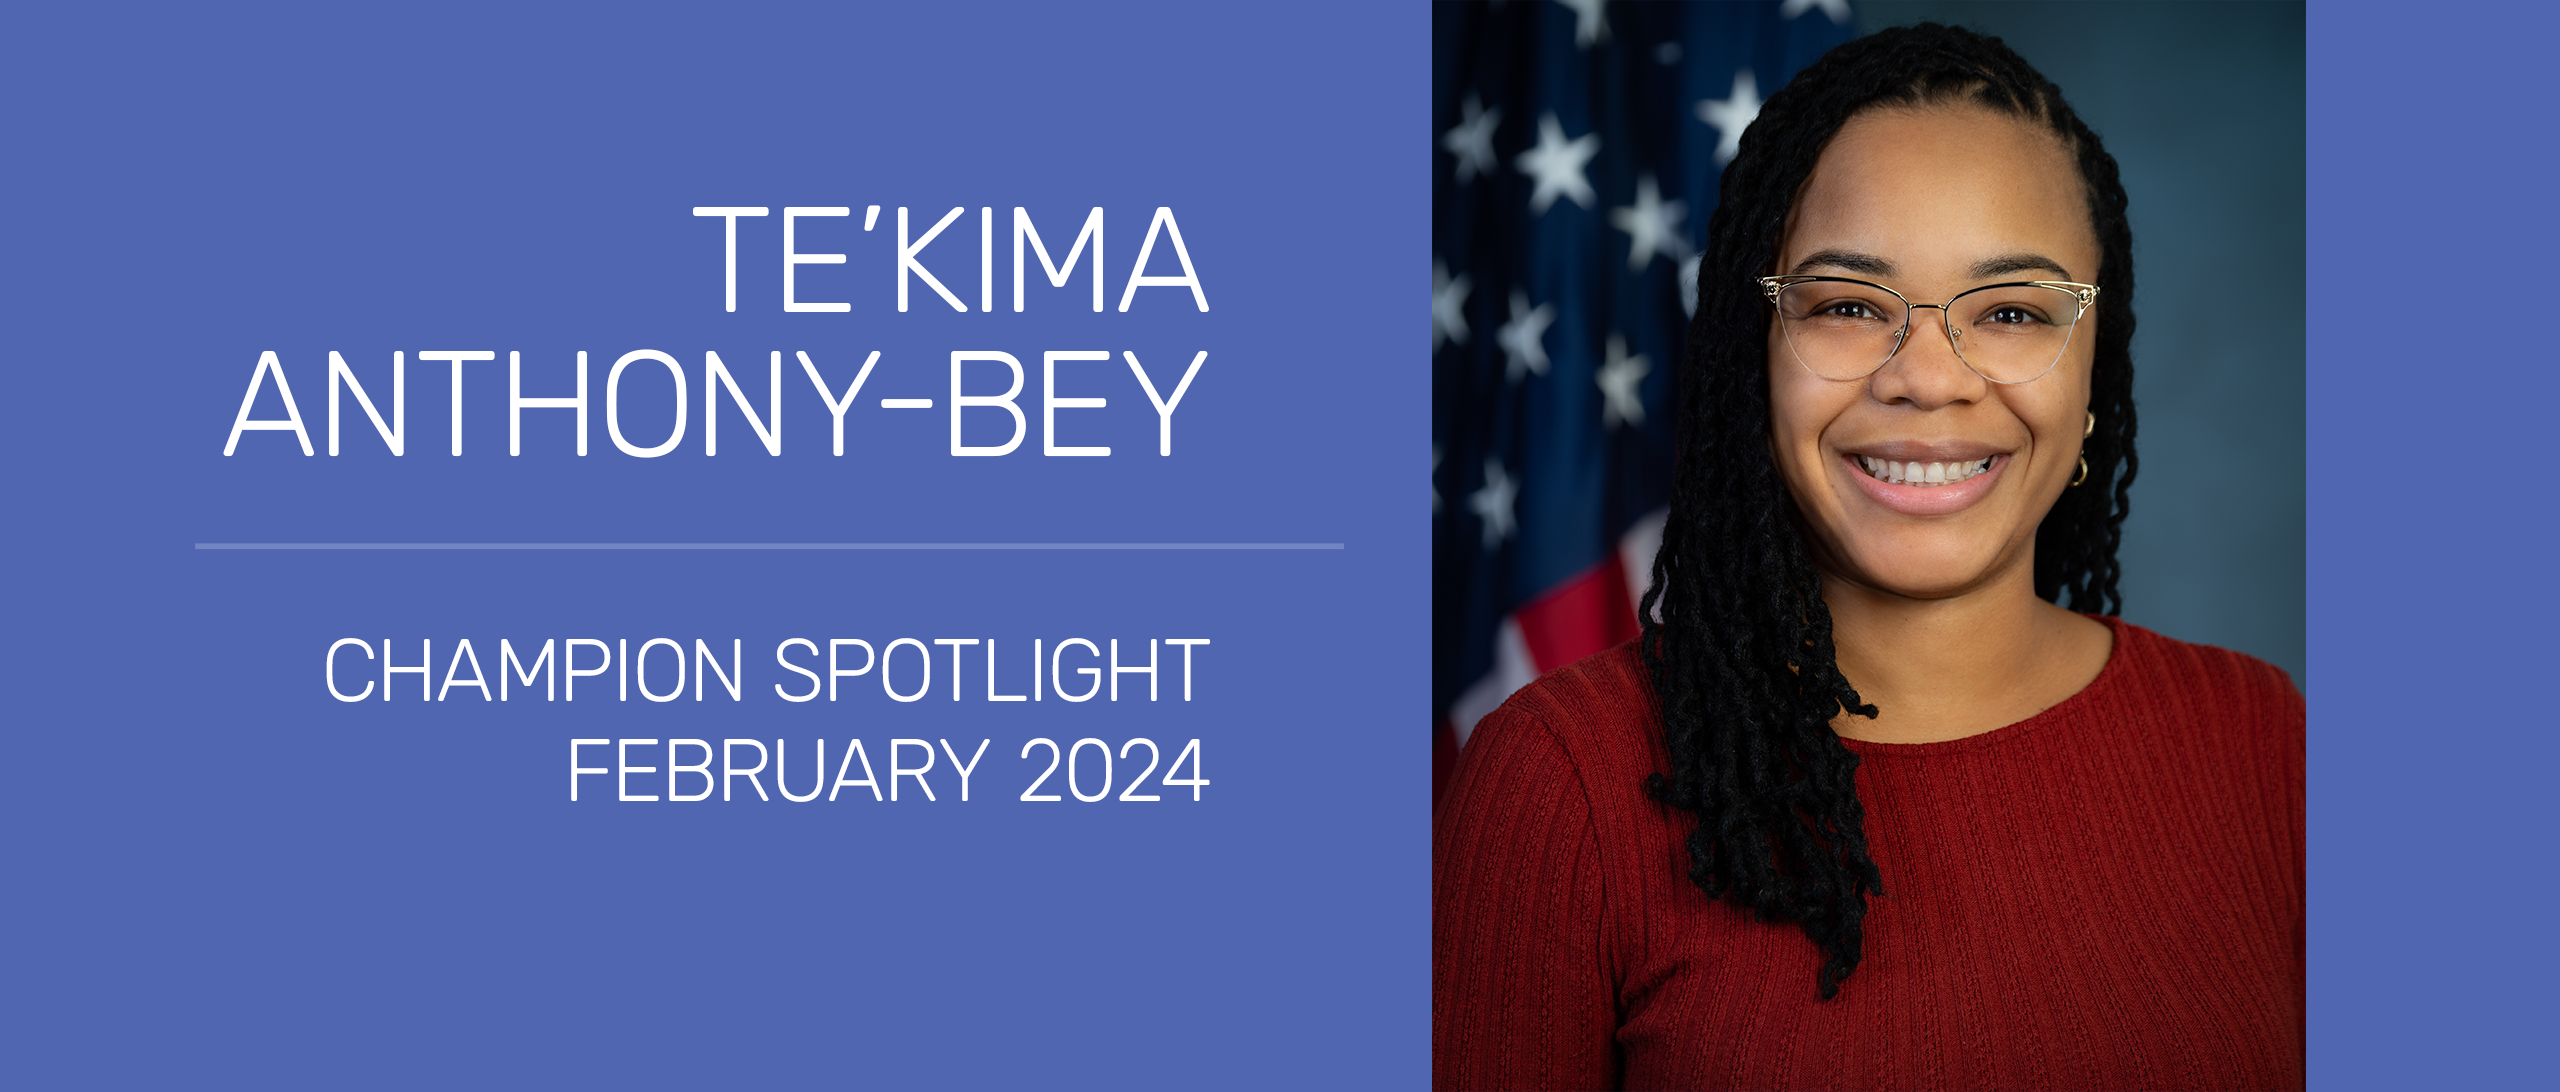 Champion Spotlight: Te’Kima Anthony-Bey, LMSW, Talks Housing, Health Justice, and Health Equity